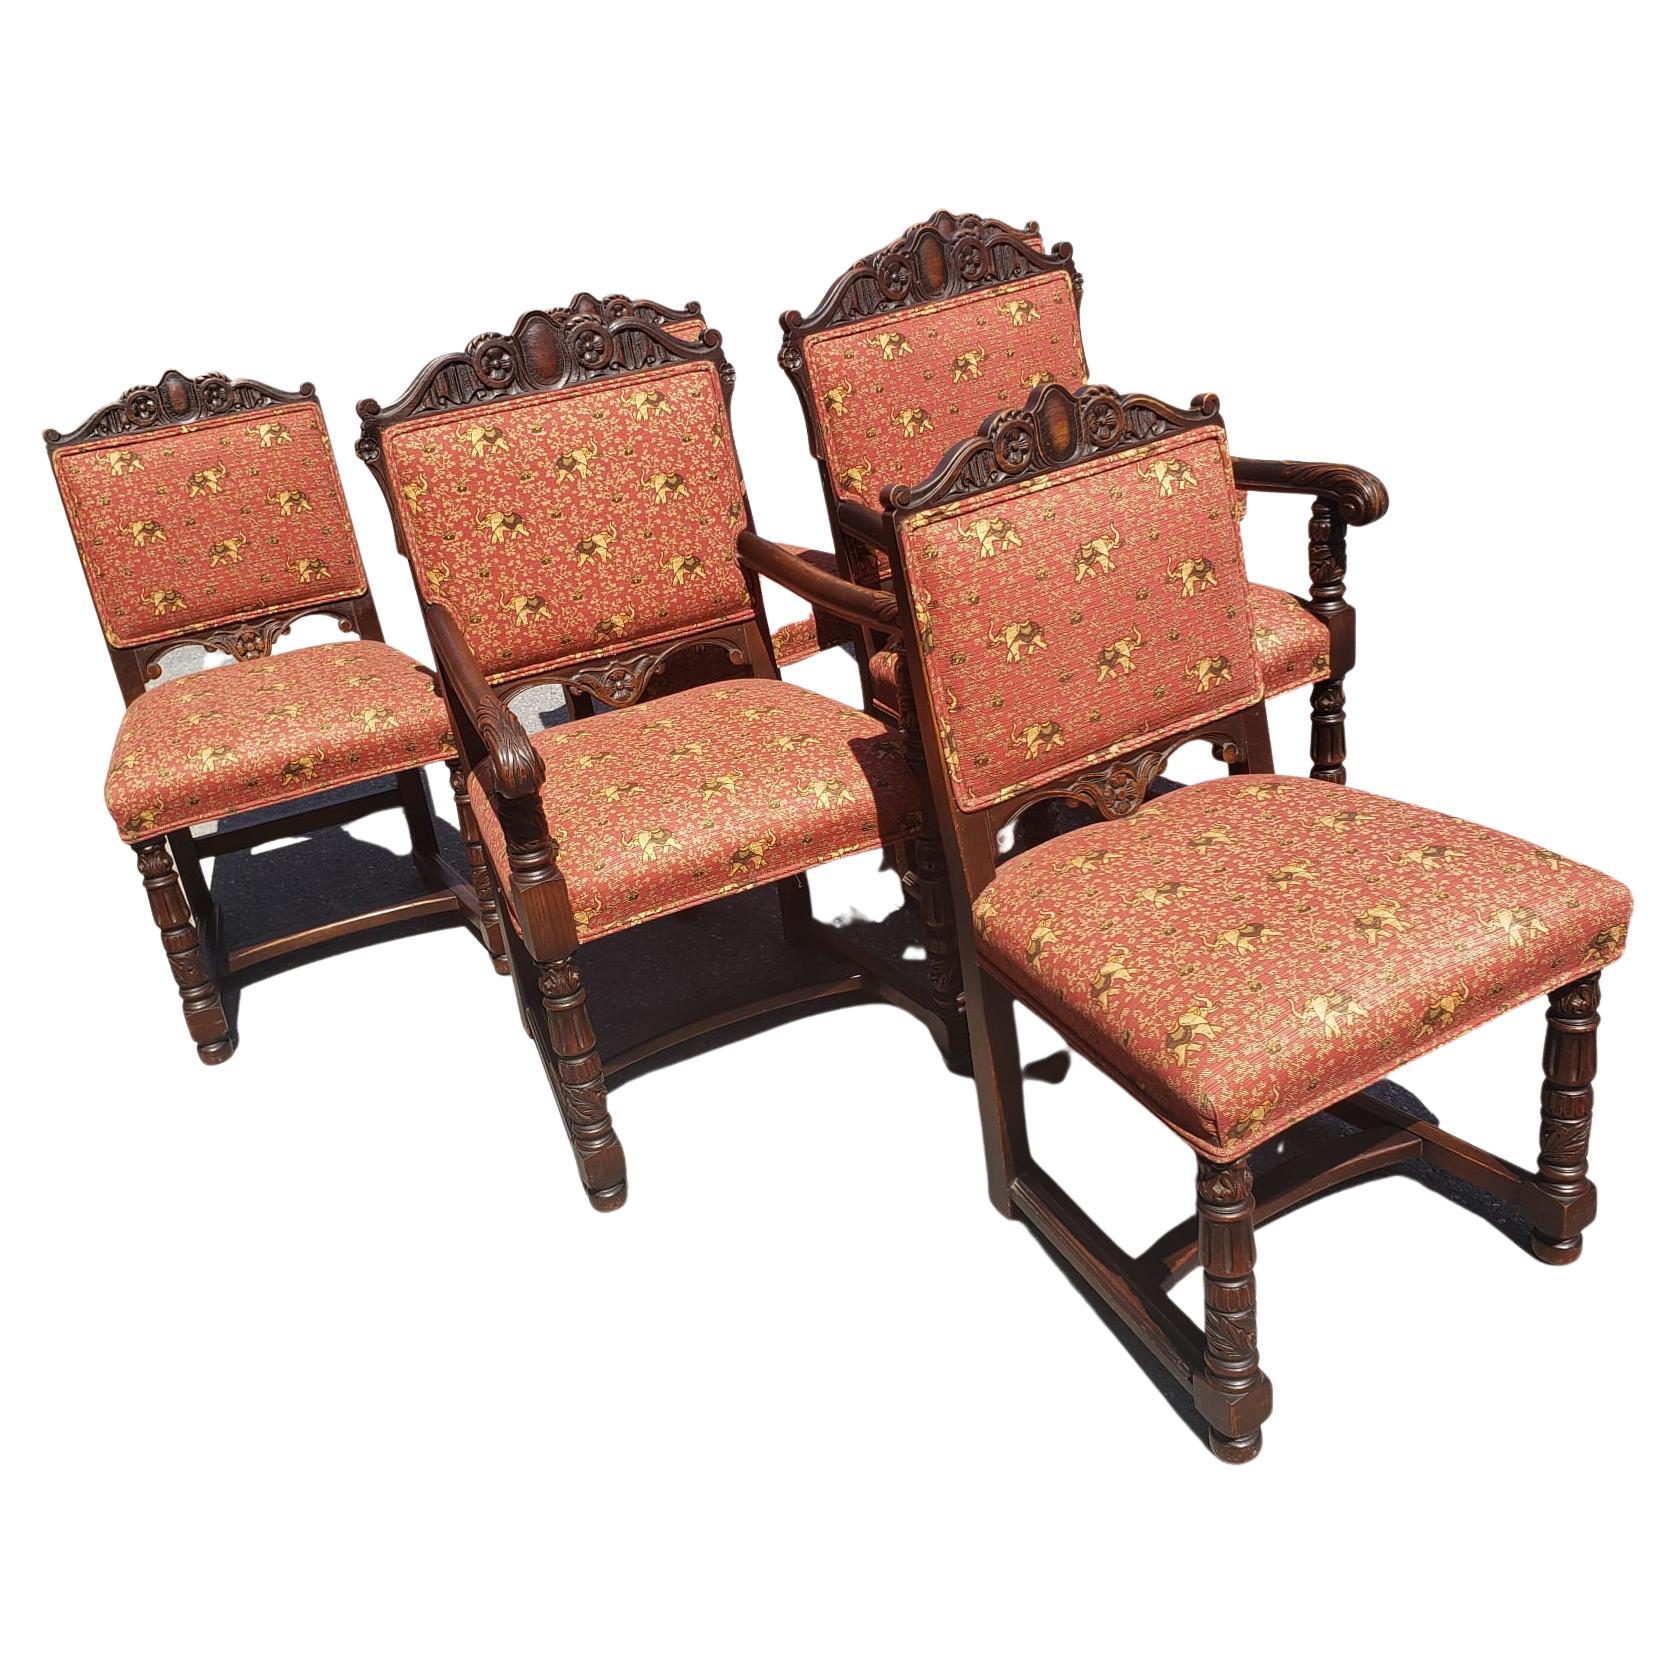 Set of six 1910s Edwardian hand carved Oak with 4 side chairs and 2 captain chairs. Intricately hand carved on back top, bottom and legs. Recently and professionally re-upholstered with custom fabric with elephant theme. Measurements are:
21.5